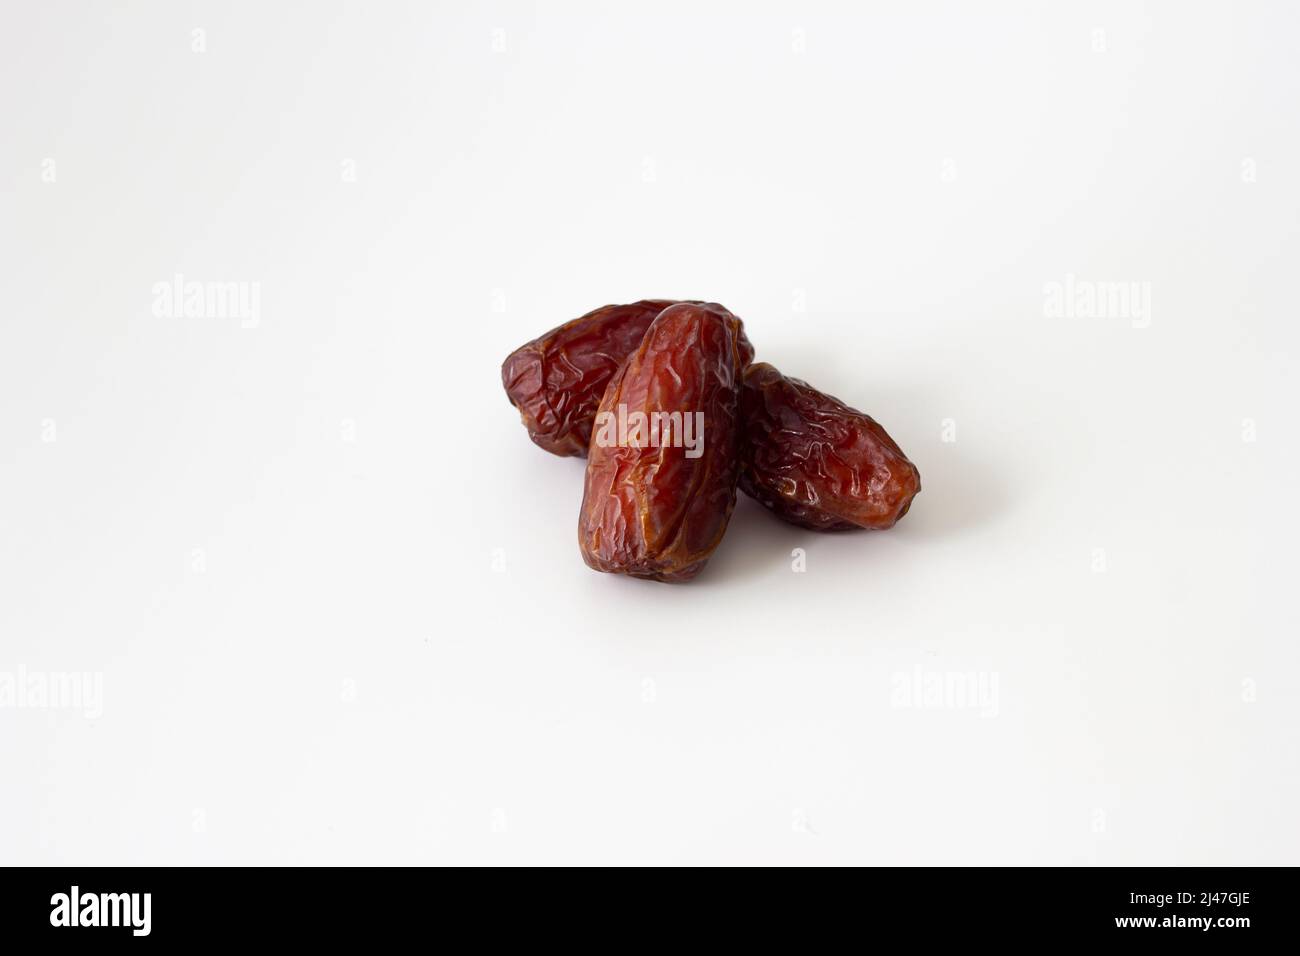 abstract Date fruit isolated on white background or texture Stock Photo